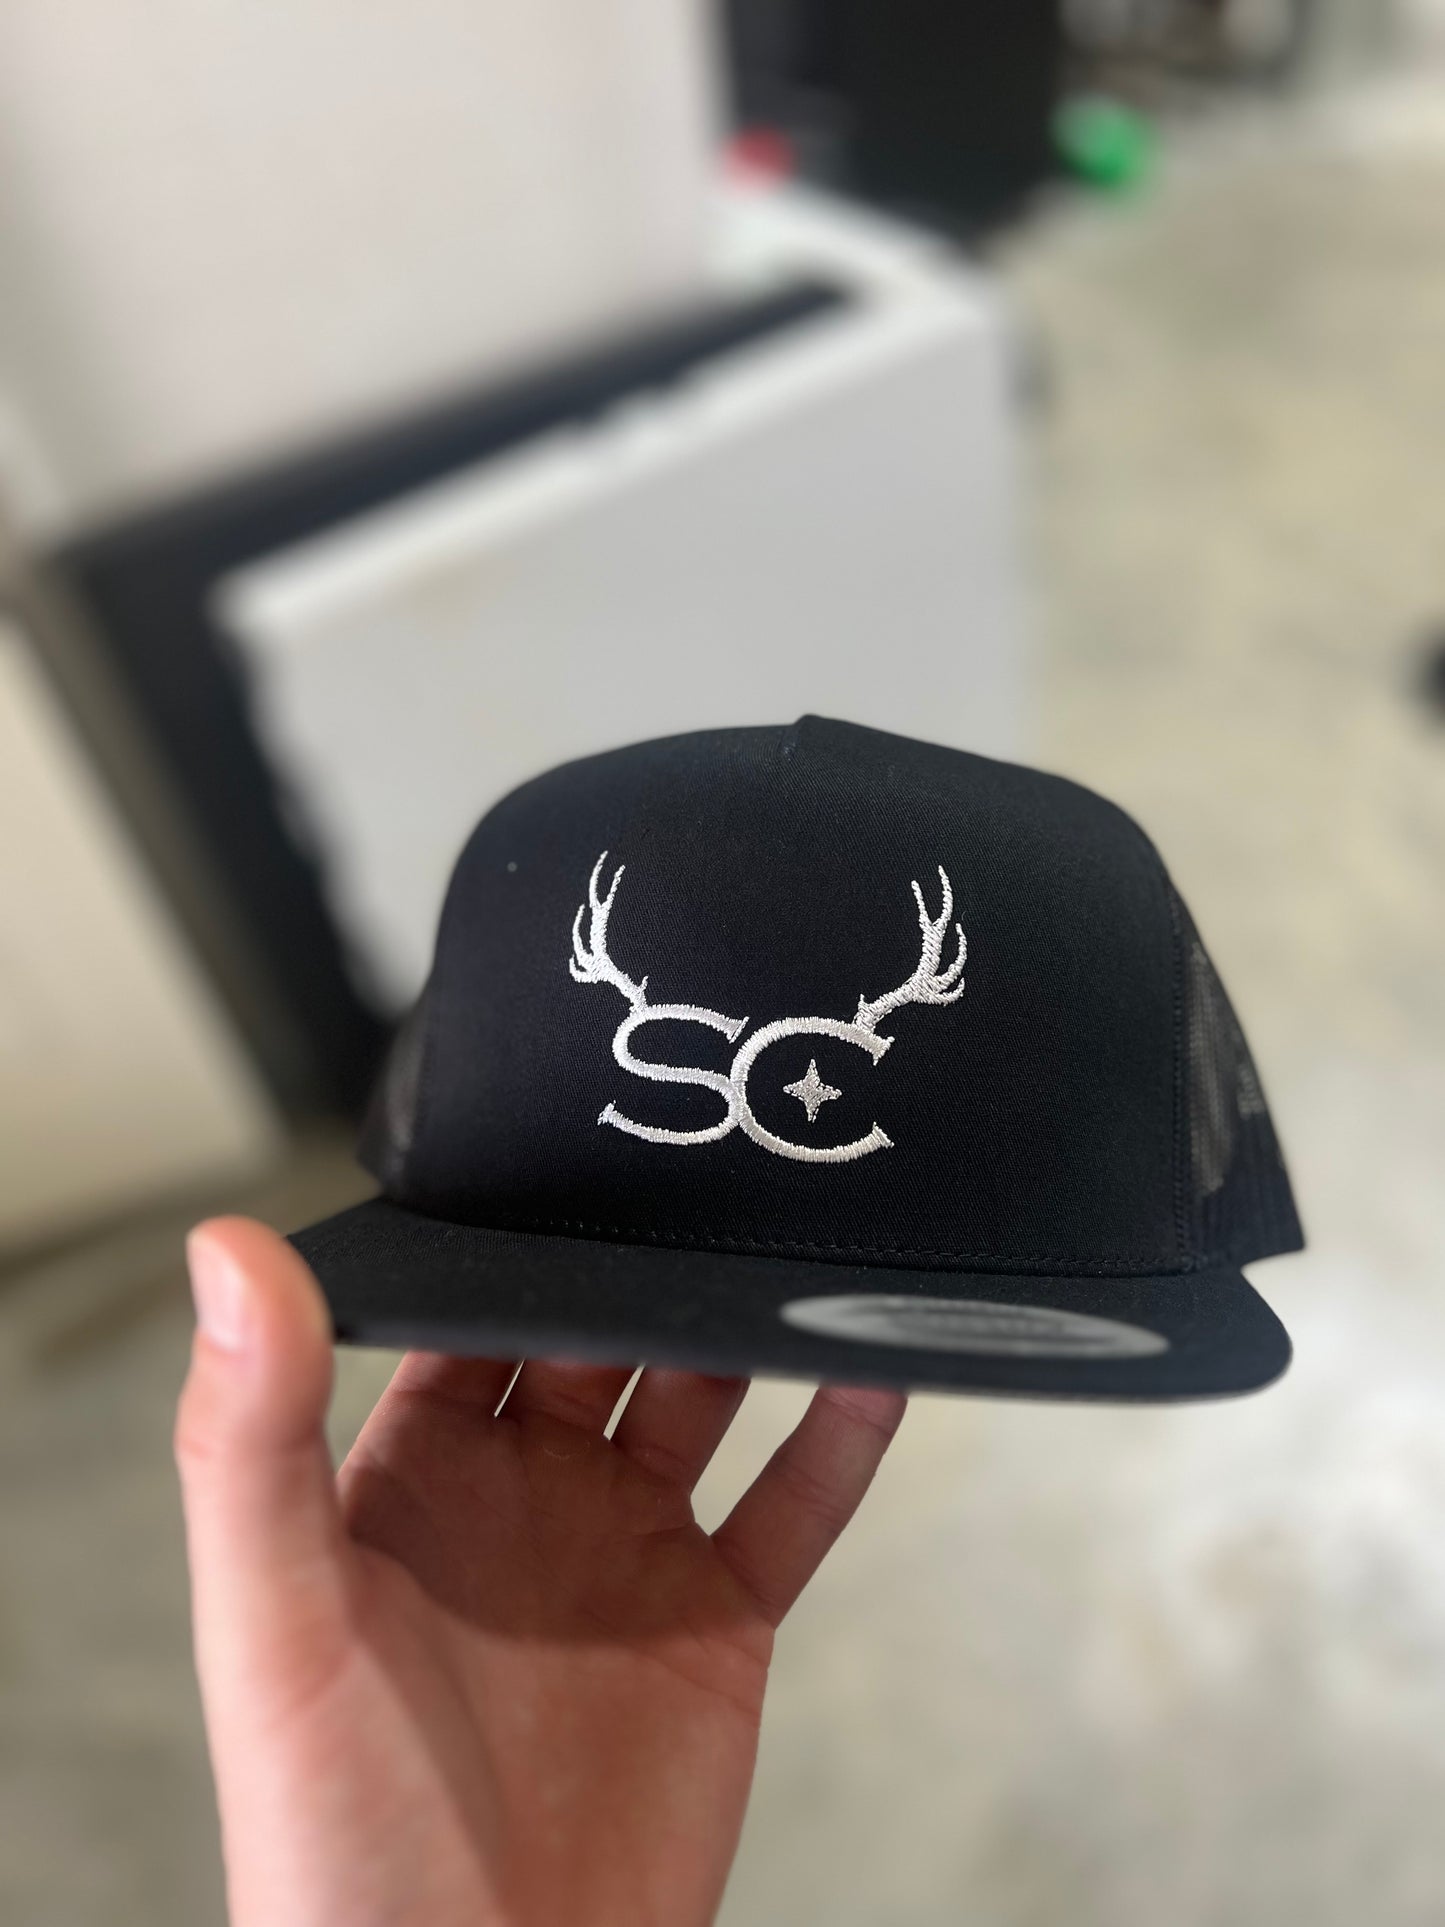 Southern Stag - All Black